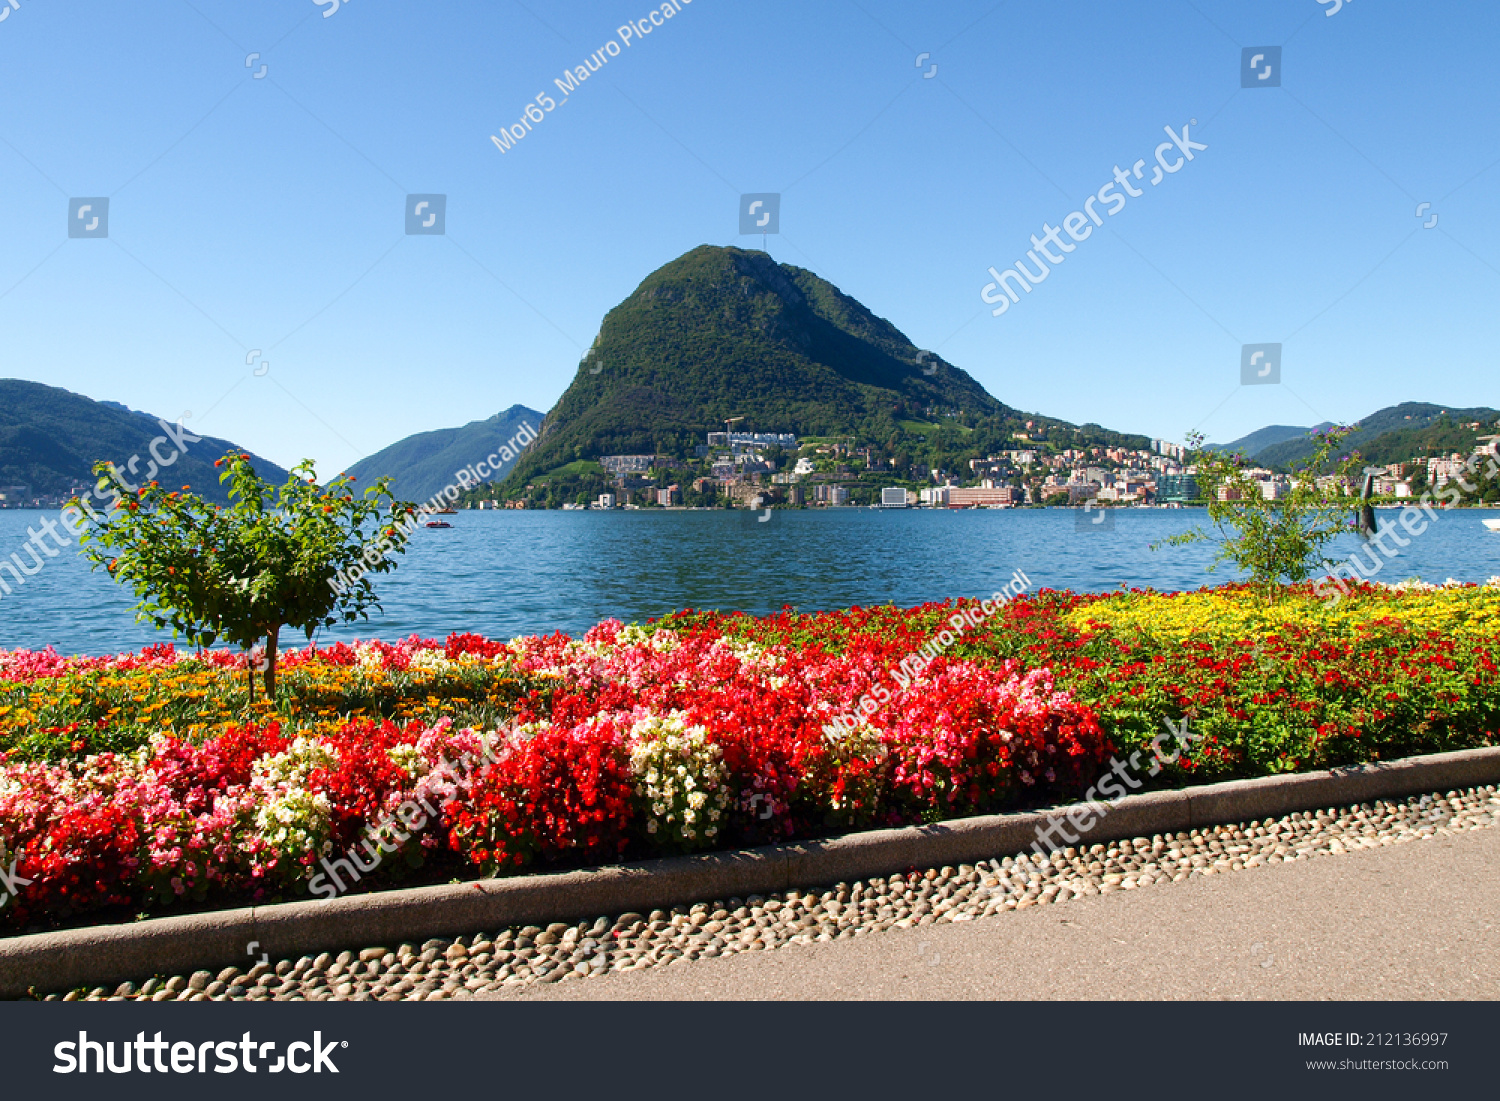 Lugano, Switzerland - Juli 31, 2014: Images of the Gulf of Lugano from Monte Bre above the City. #212136997